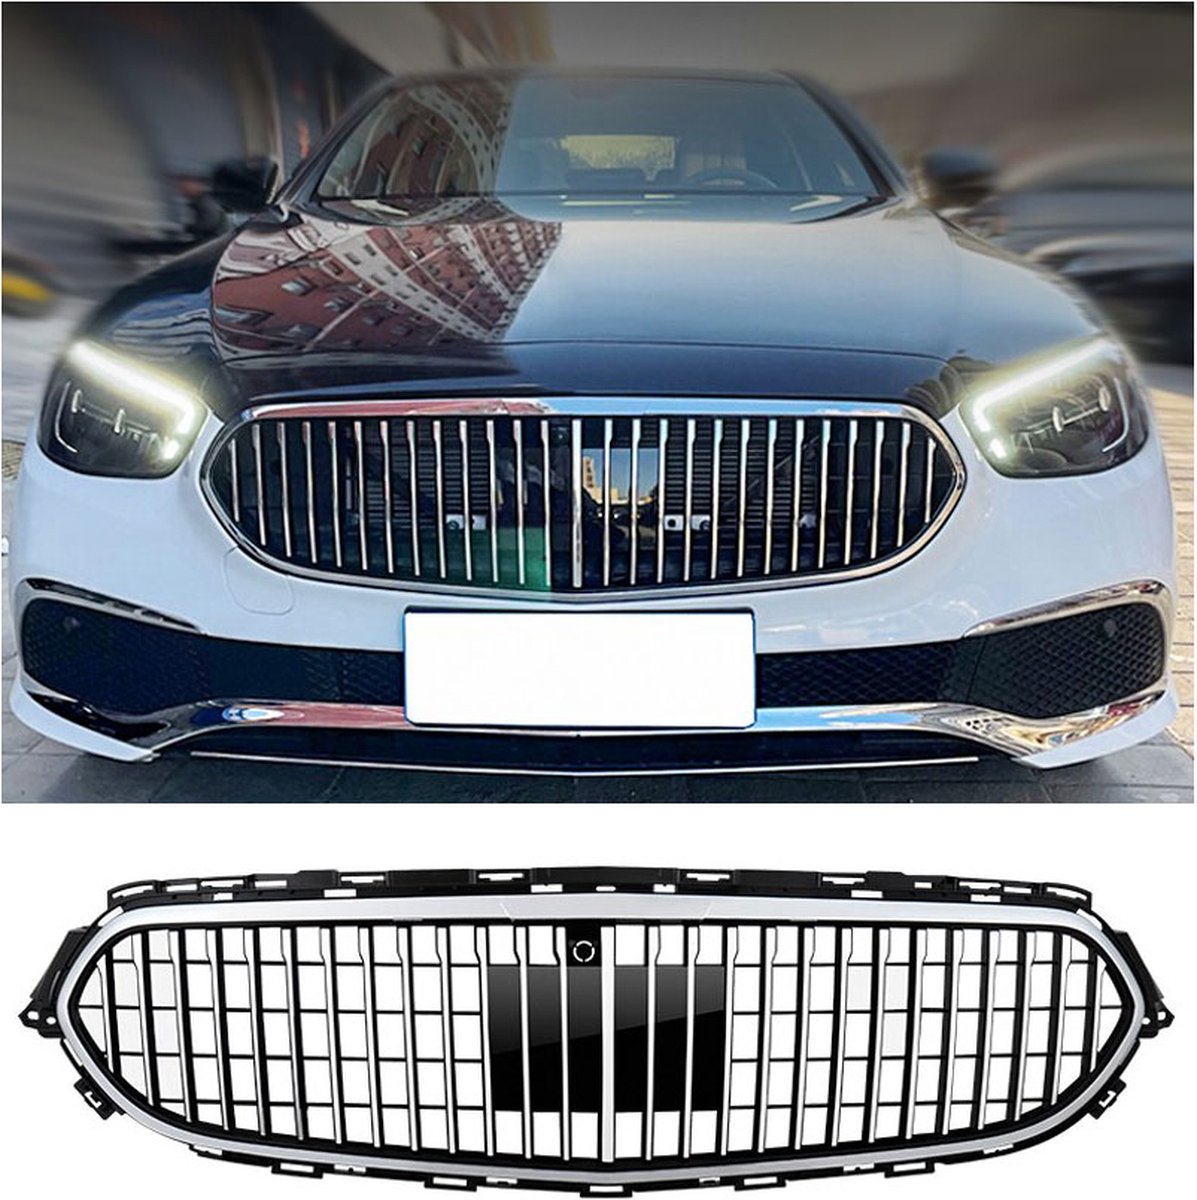 Grill Sport grille past voor Mercedes W213 Facelift in Maybach design